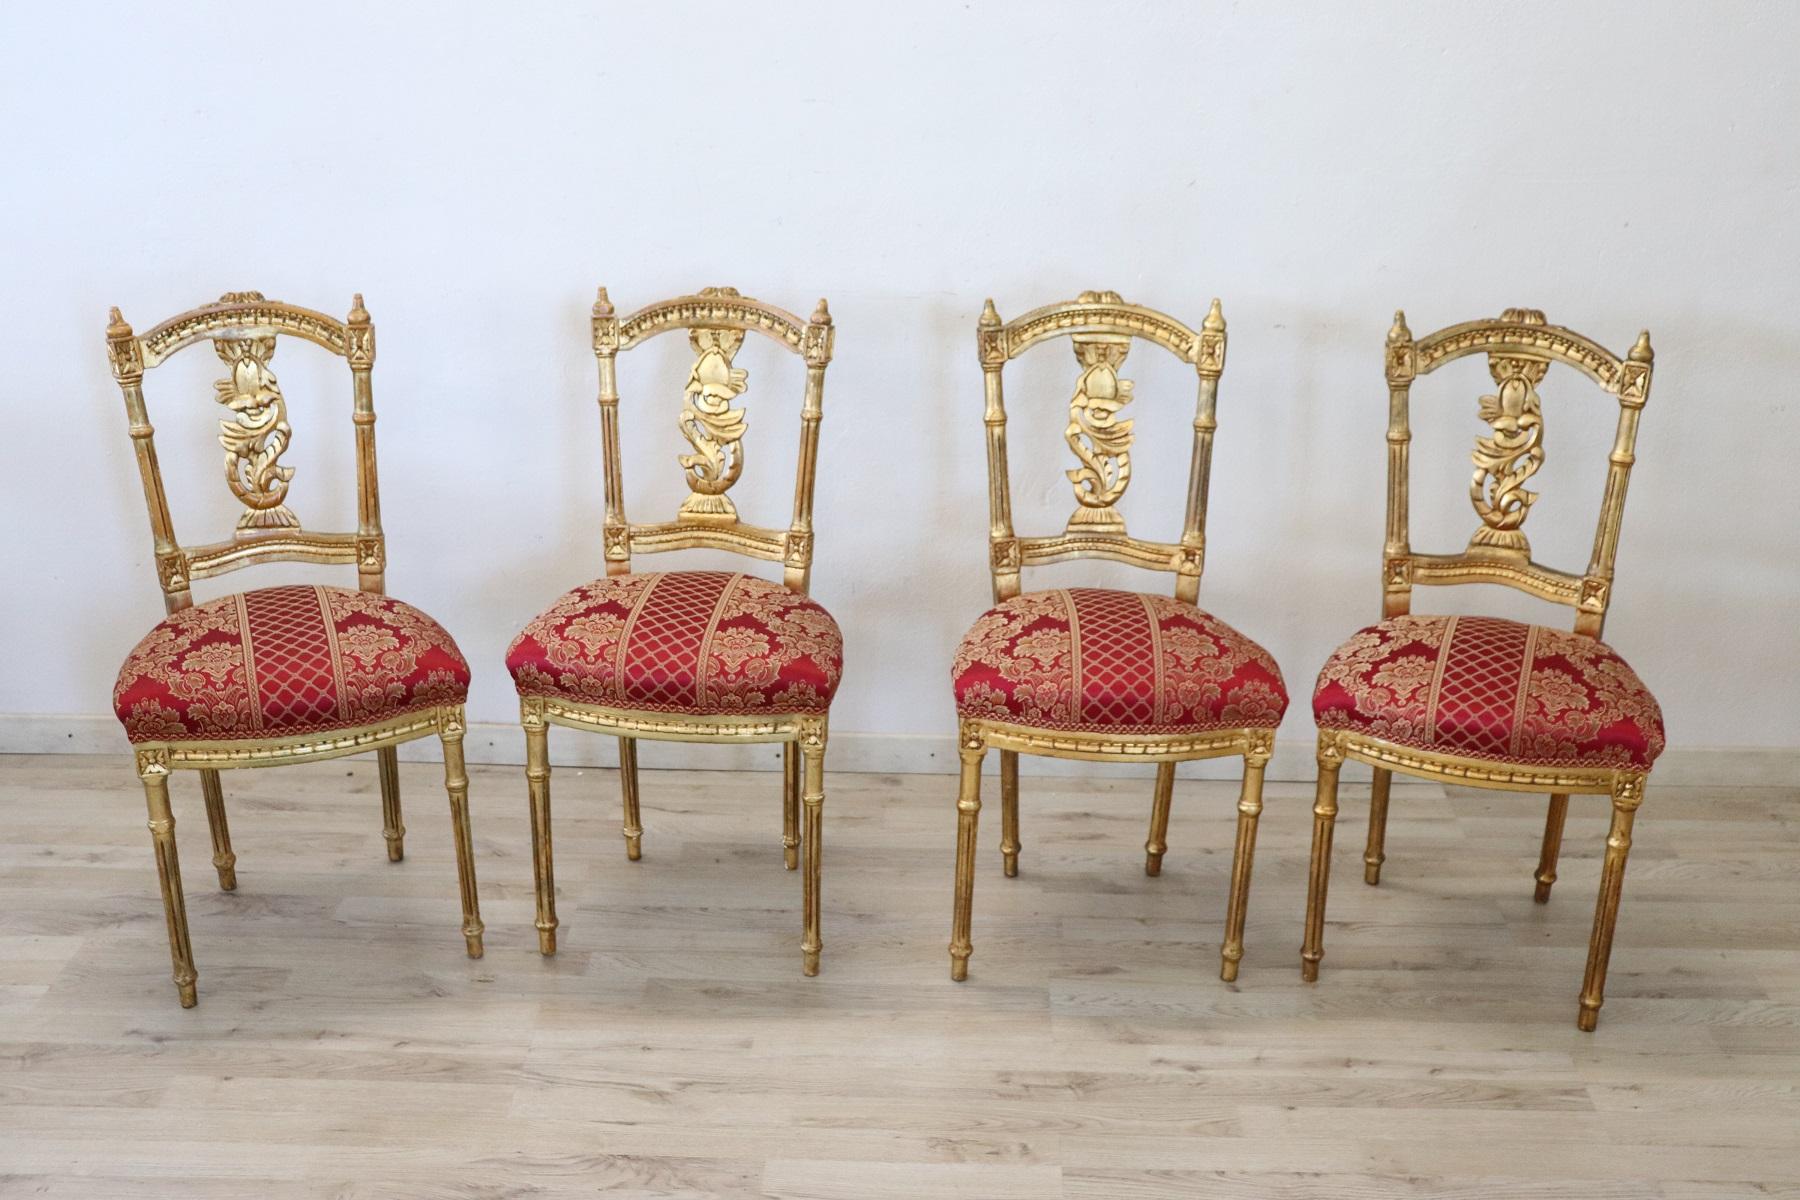 Series of four refined early 20th century authentic Italian louis XVI style chairs. These chairs are of extreme refinement made of carved wood with decorated back and completely covered in precious gold leaf. The session has been restored. The